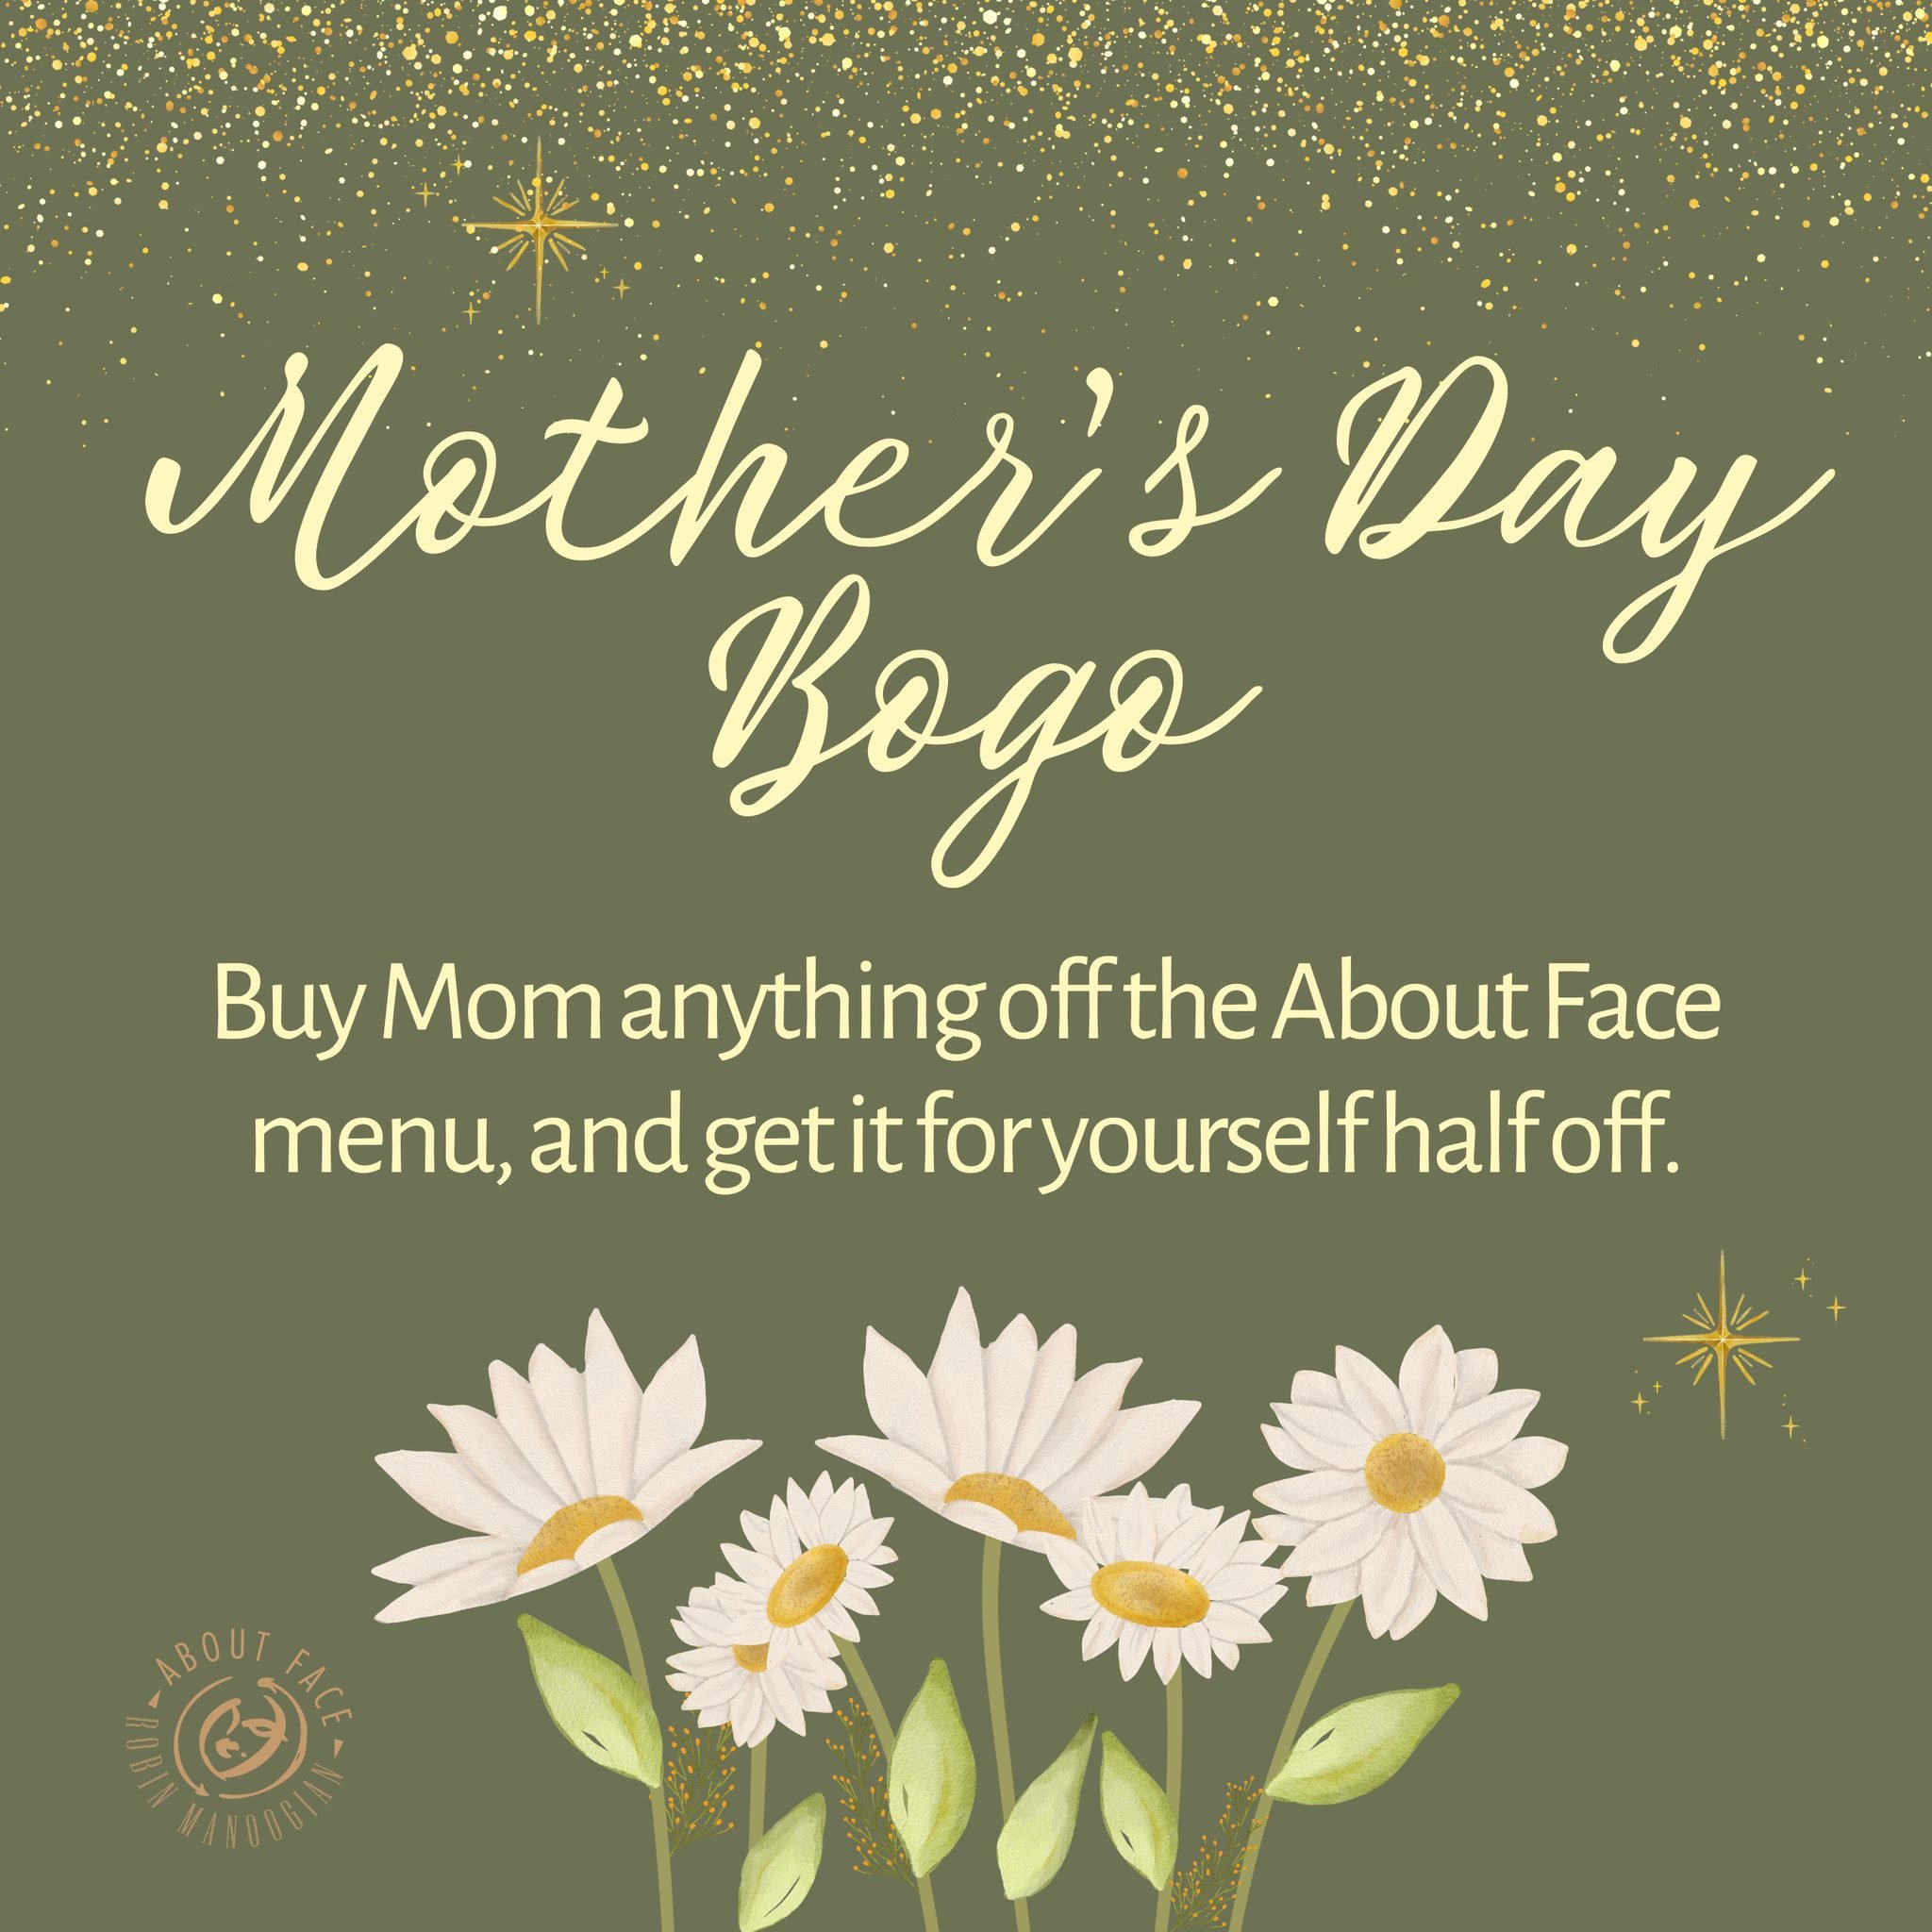 Don't stress about last-minute gifts! Treat her to a luxurious experience and treat yourself too with our exclusive BOGO offer. 🌸 Call 248-399-1330 now or visit us in Downtown Royal Oak!
.
.
.
#MothersDay #MomSpaDay #MomDeservesIt #SpaTreatments #Pa